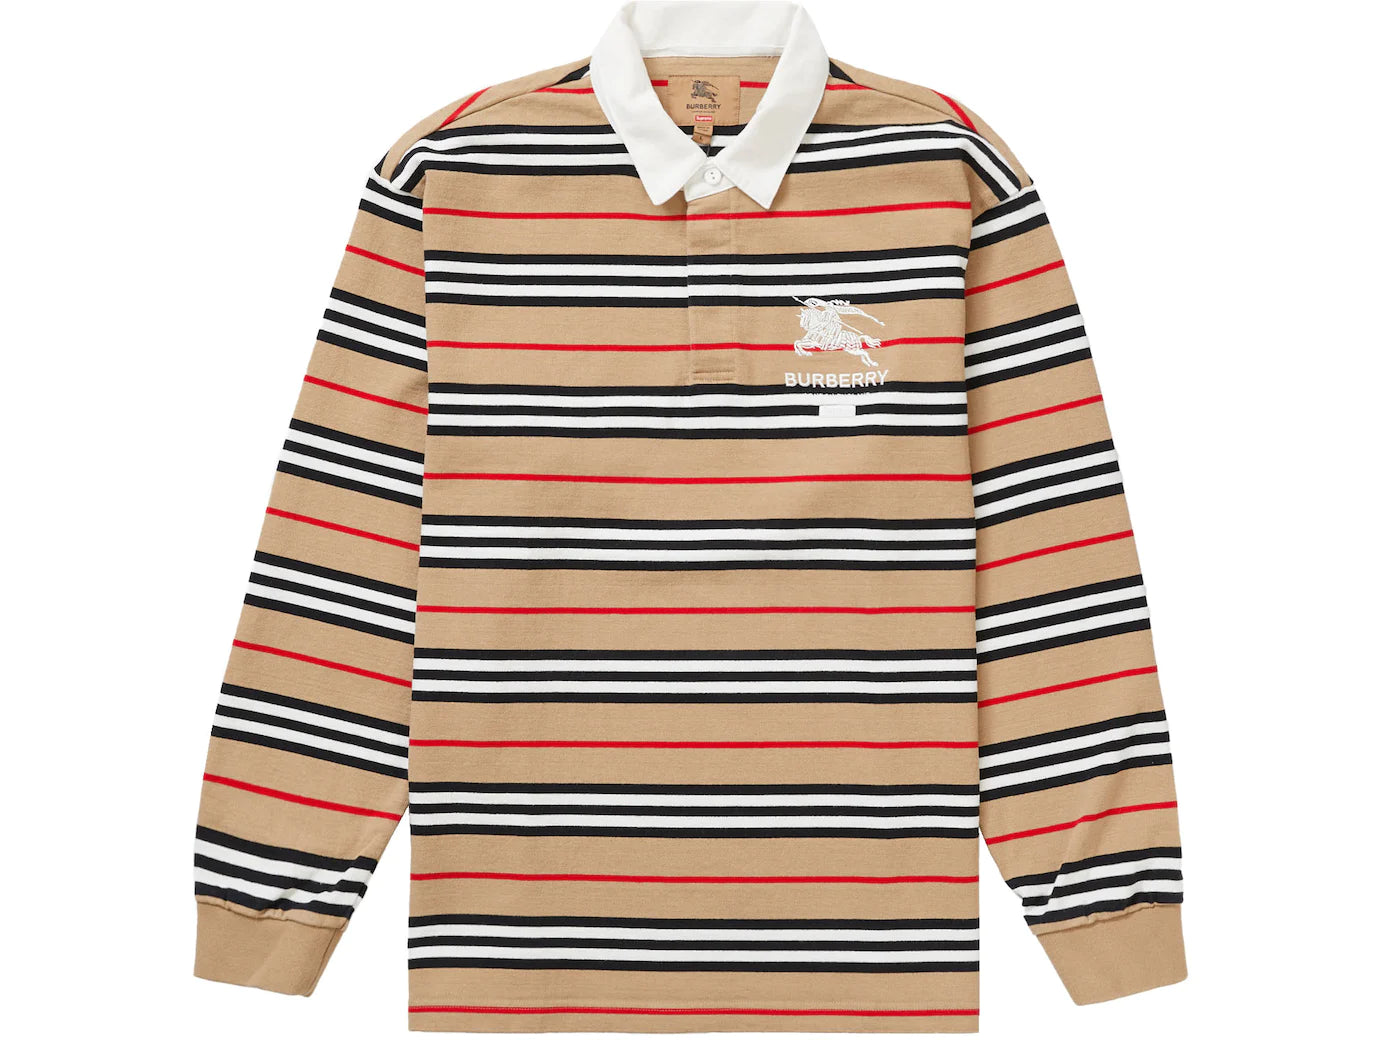 Supreme Burberry Rugby Shirt Beige